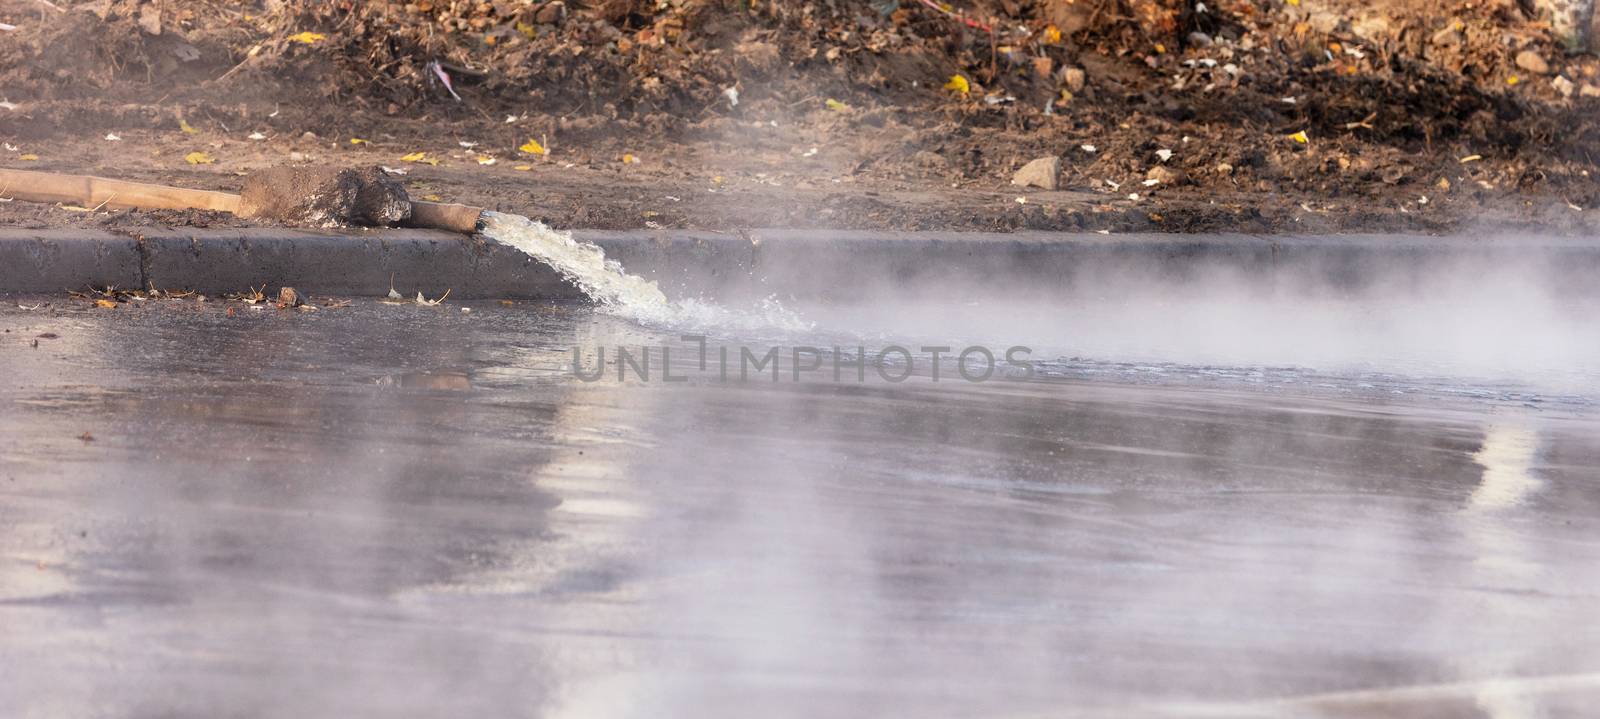 Hot water is pumped out onto the road with a pump and a fire hose, water vapor rises densely above the asphalt, image with copy space.